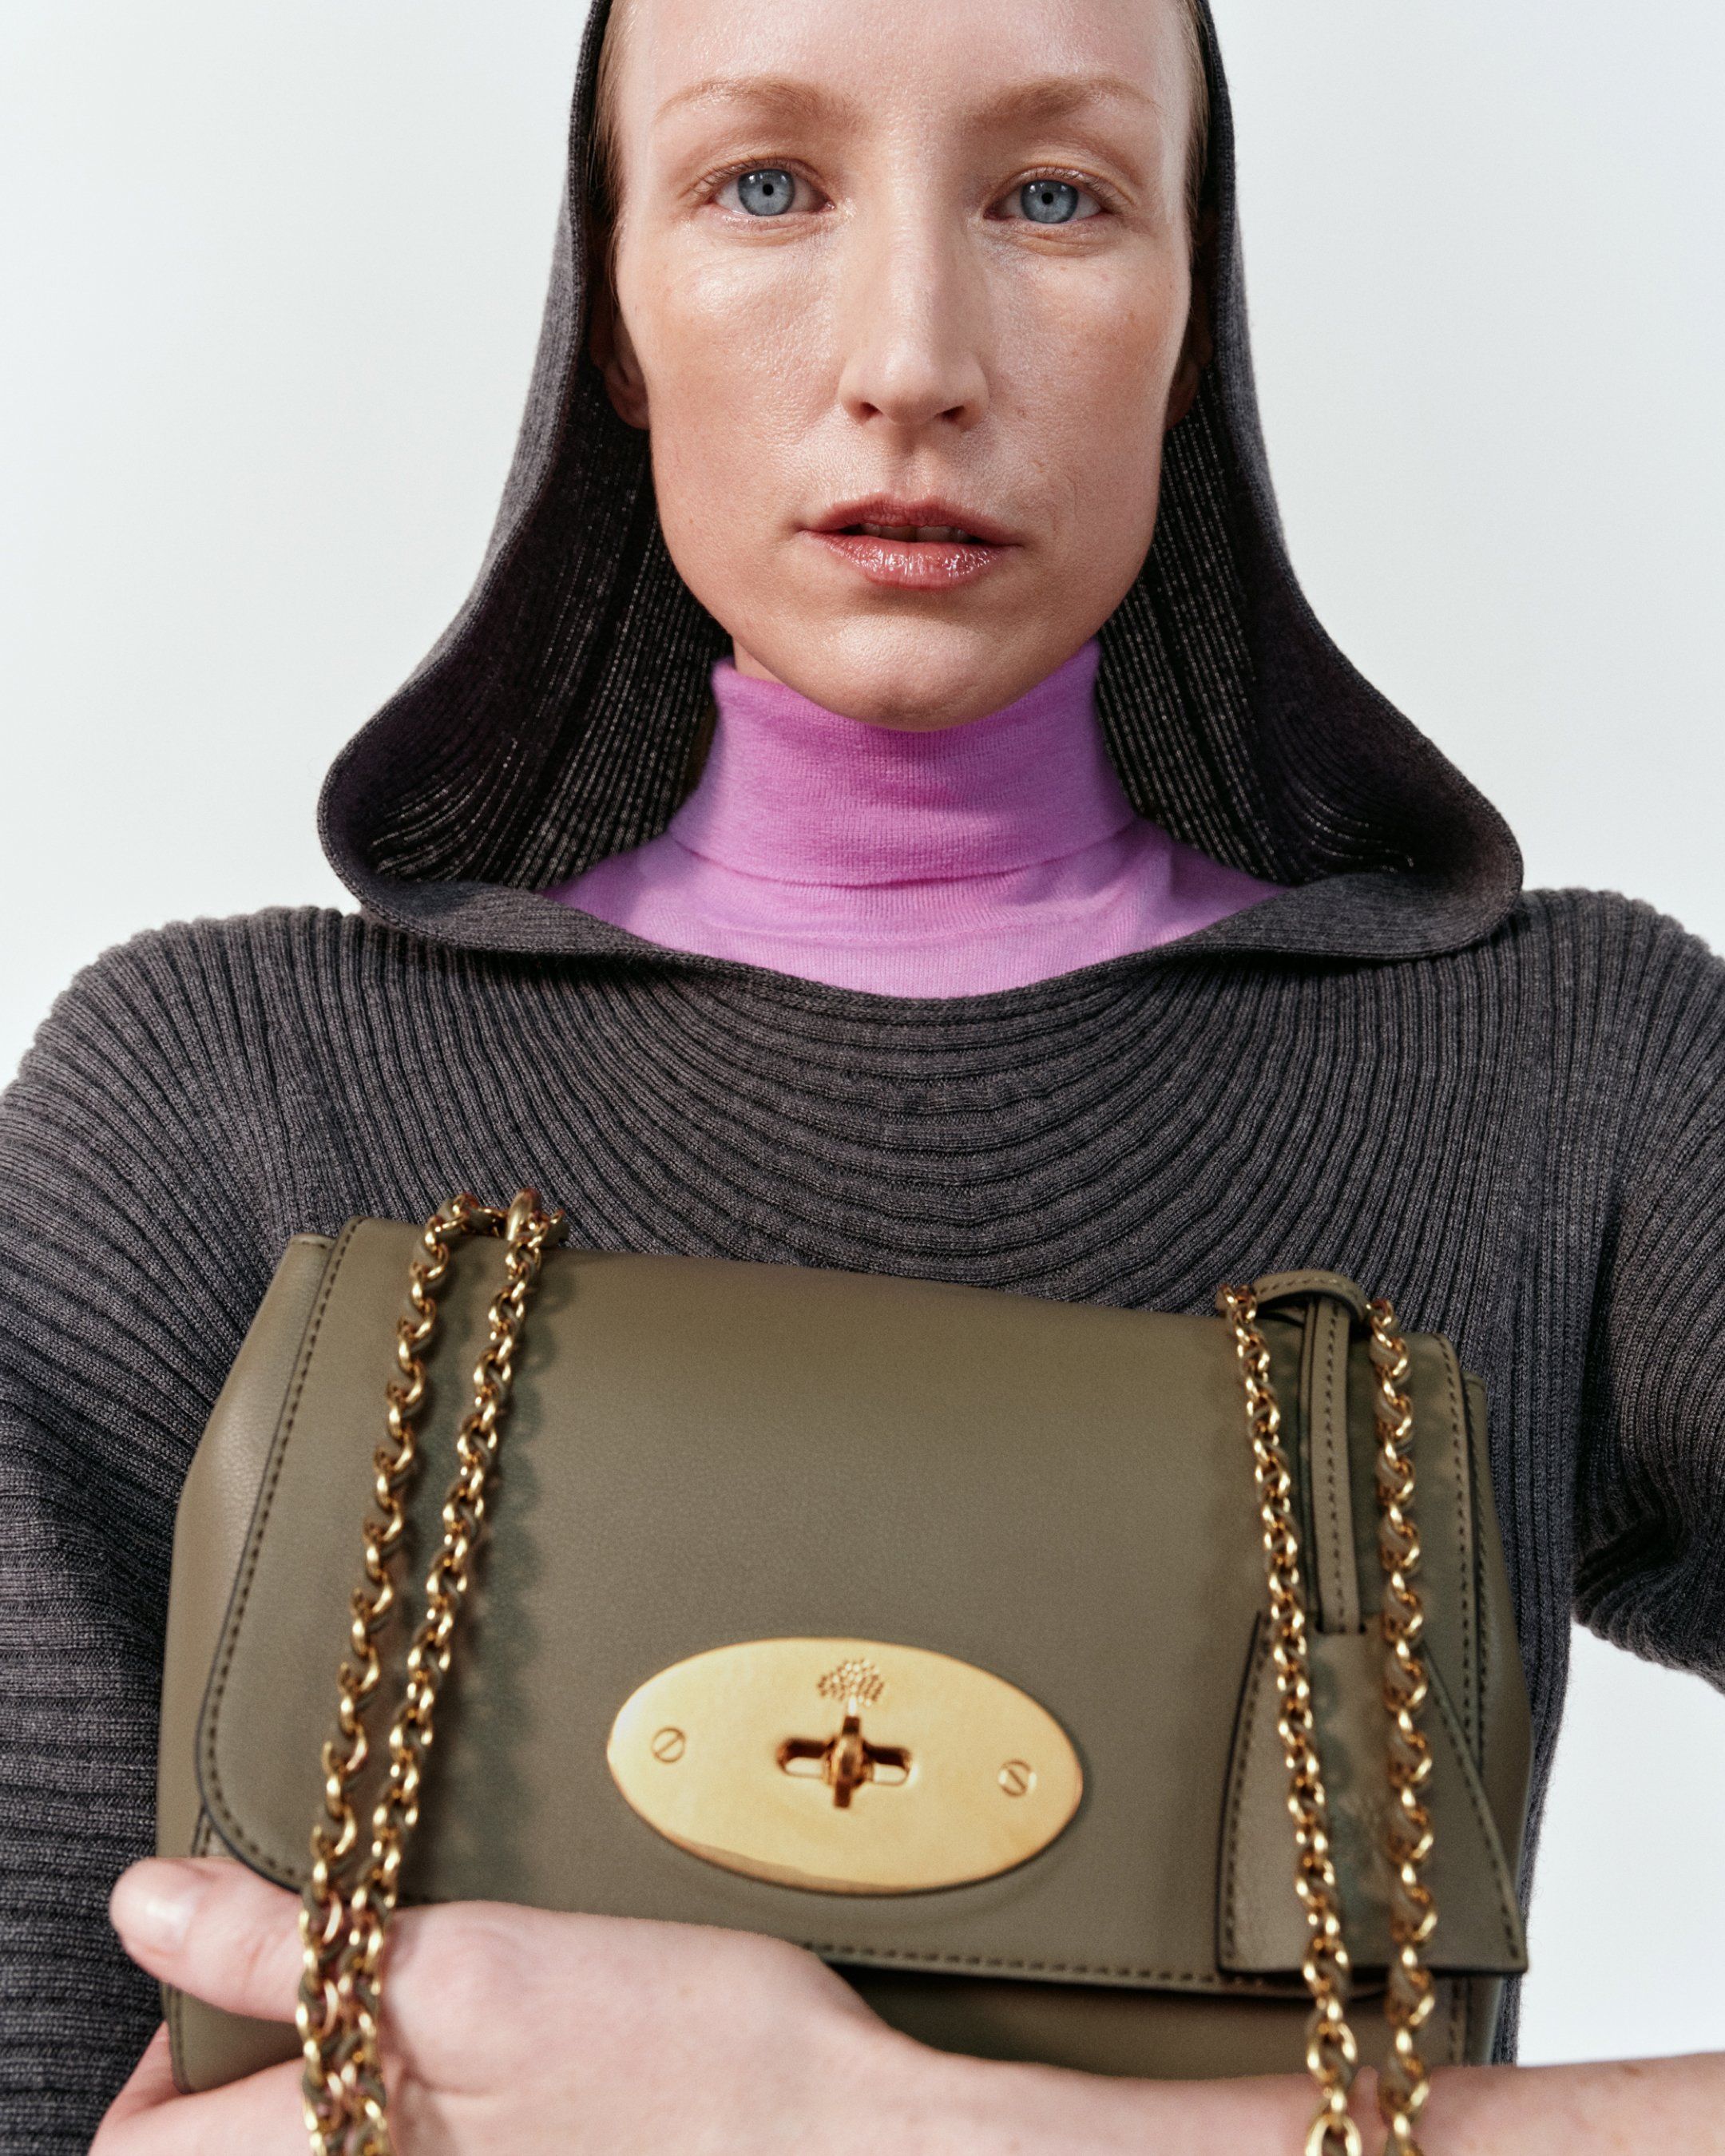 Model holding the Mulberry Lily handbag in green leather